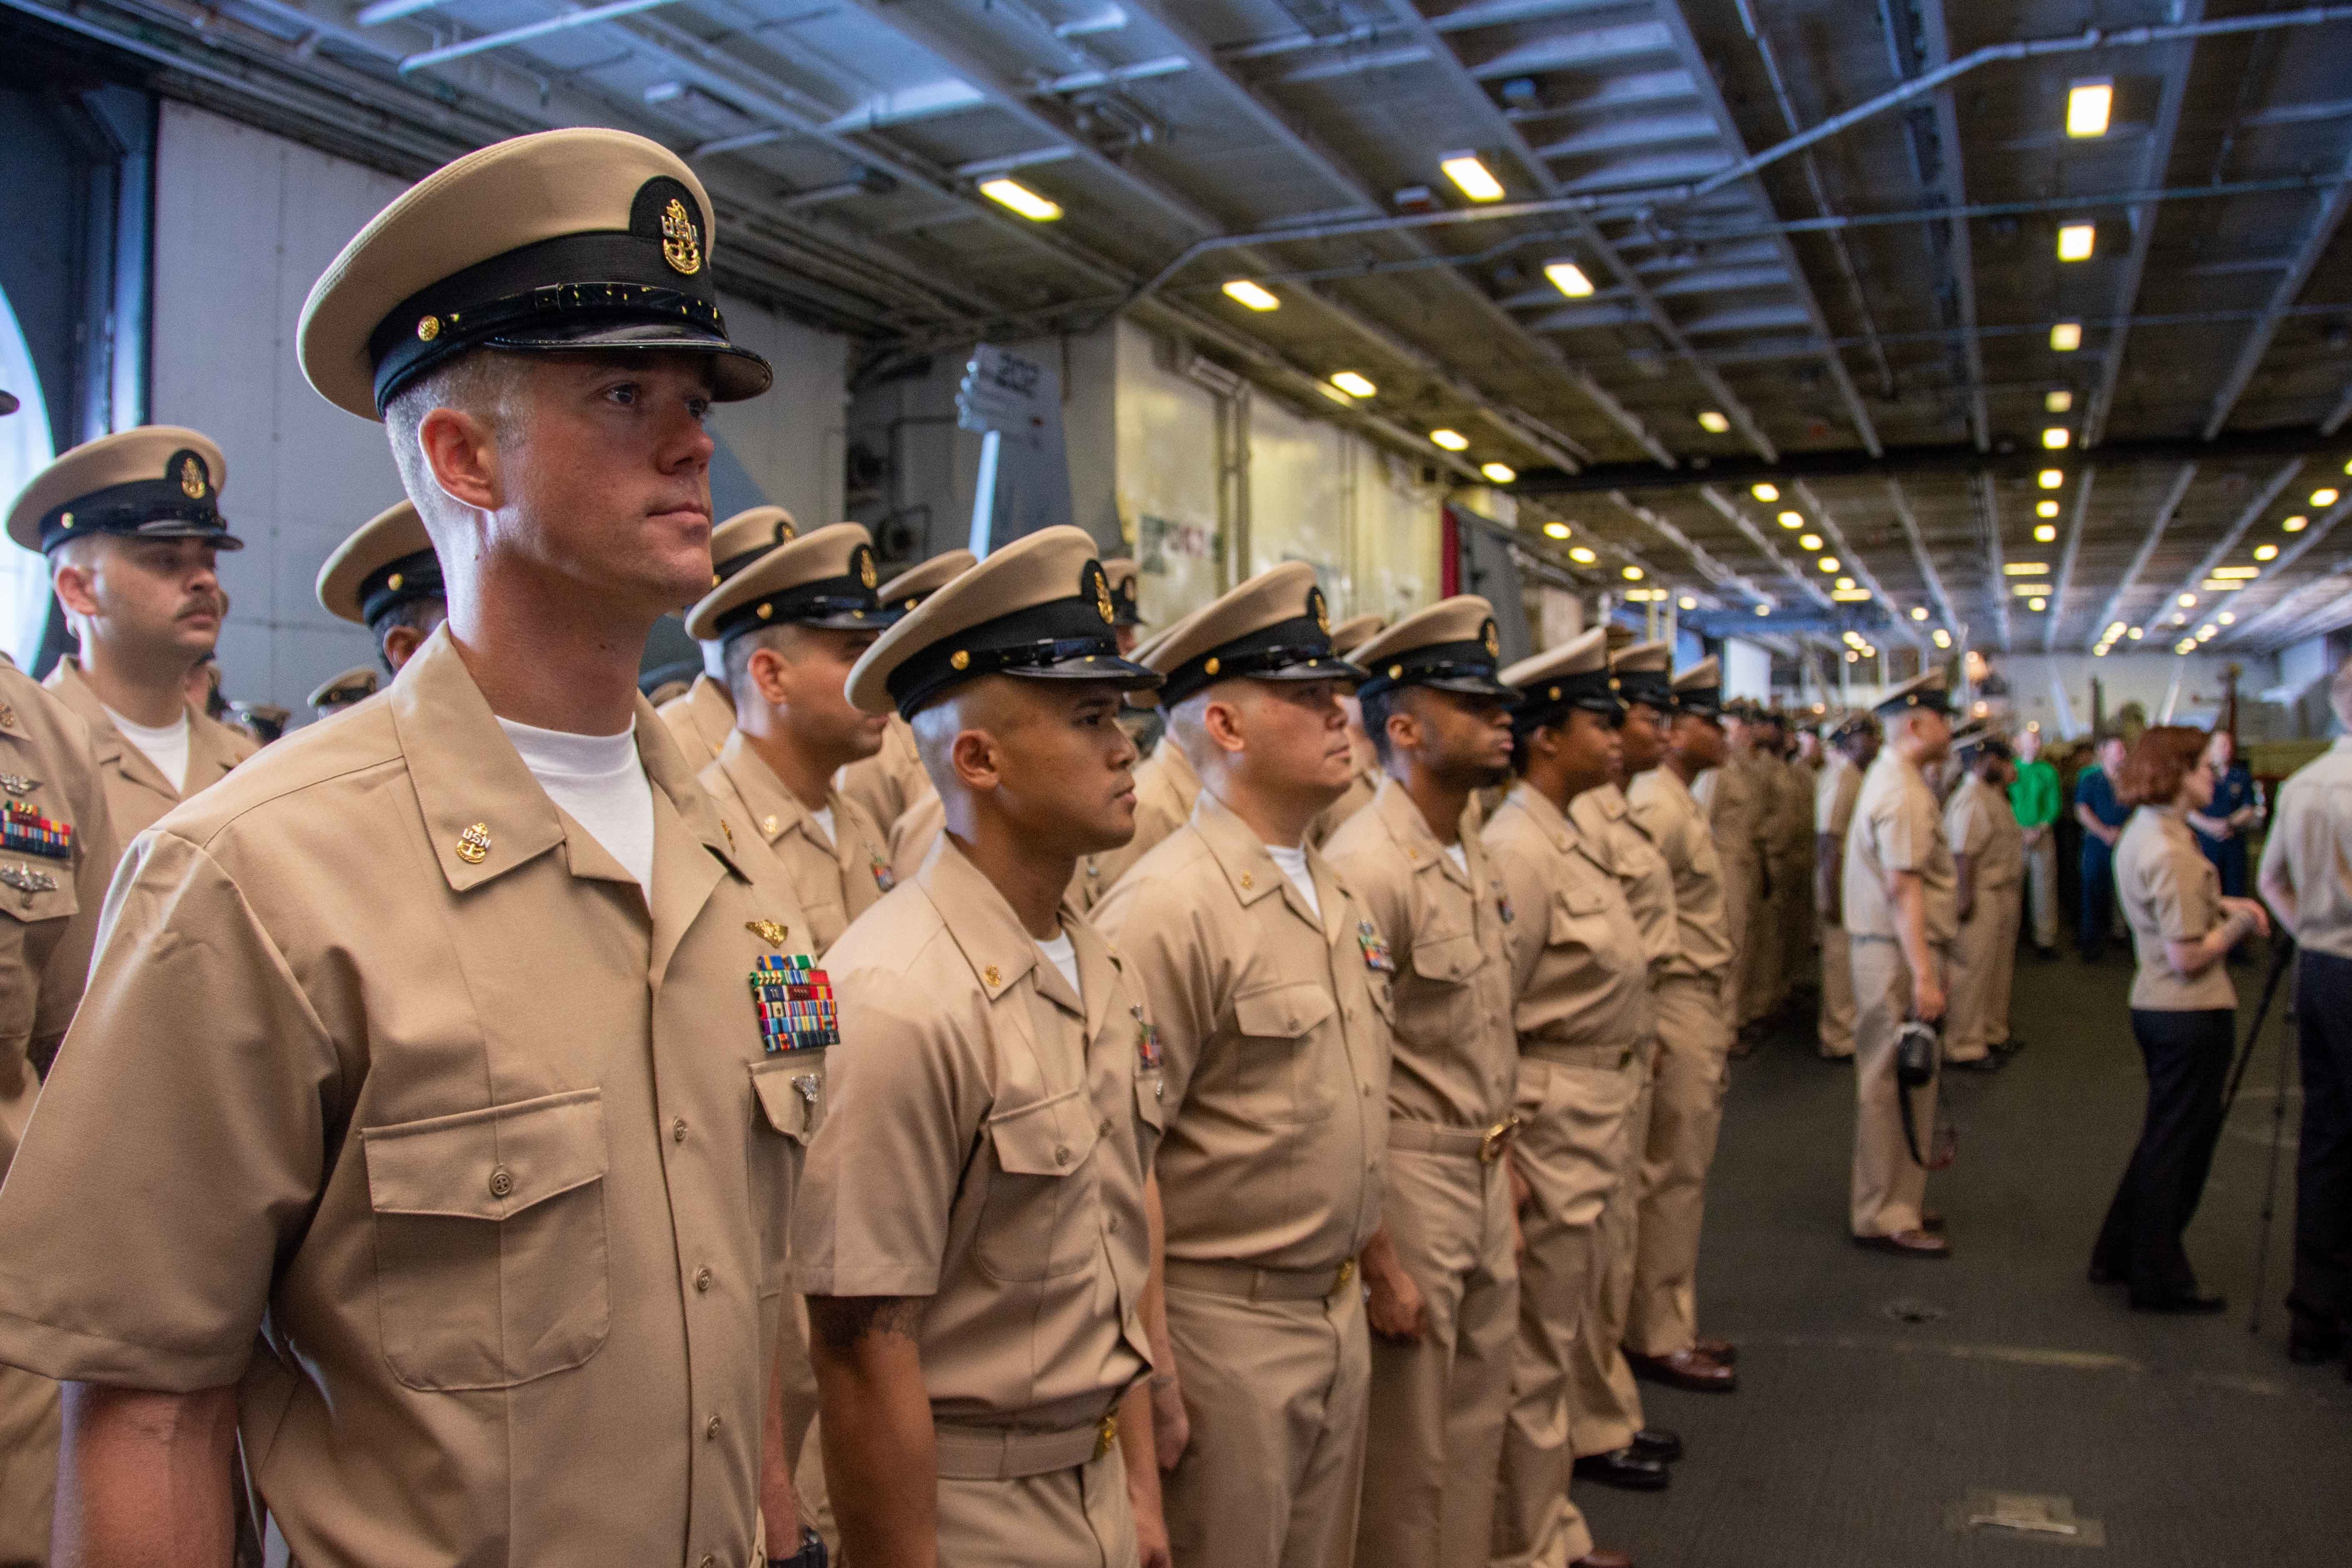 Navy Pilot Program Temporarily Suspends HighYear Tenure for Enlisted